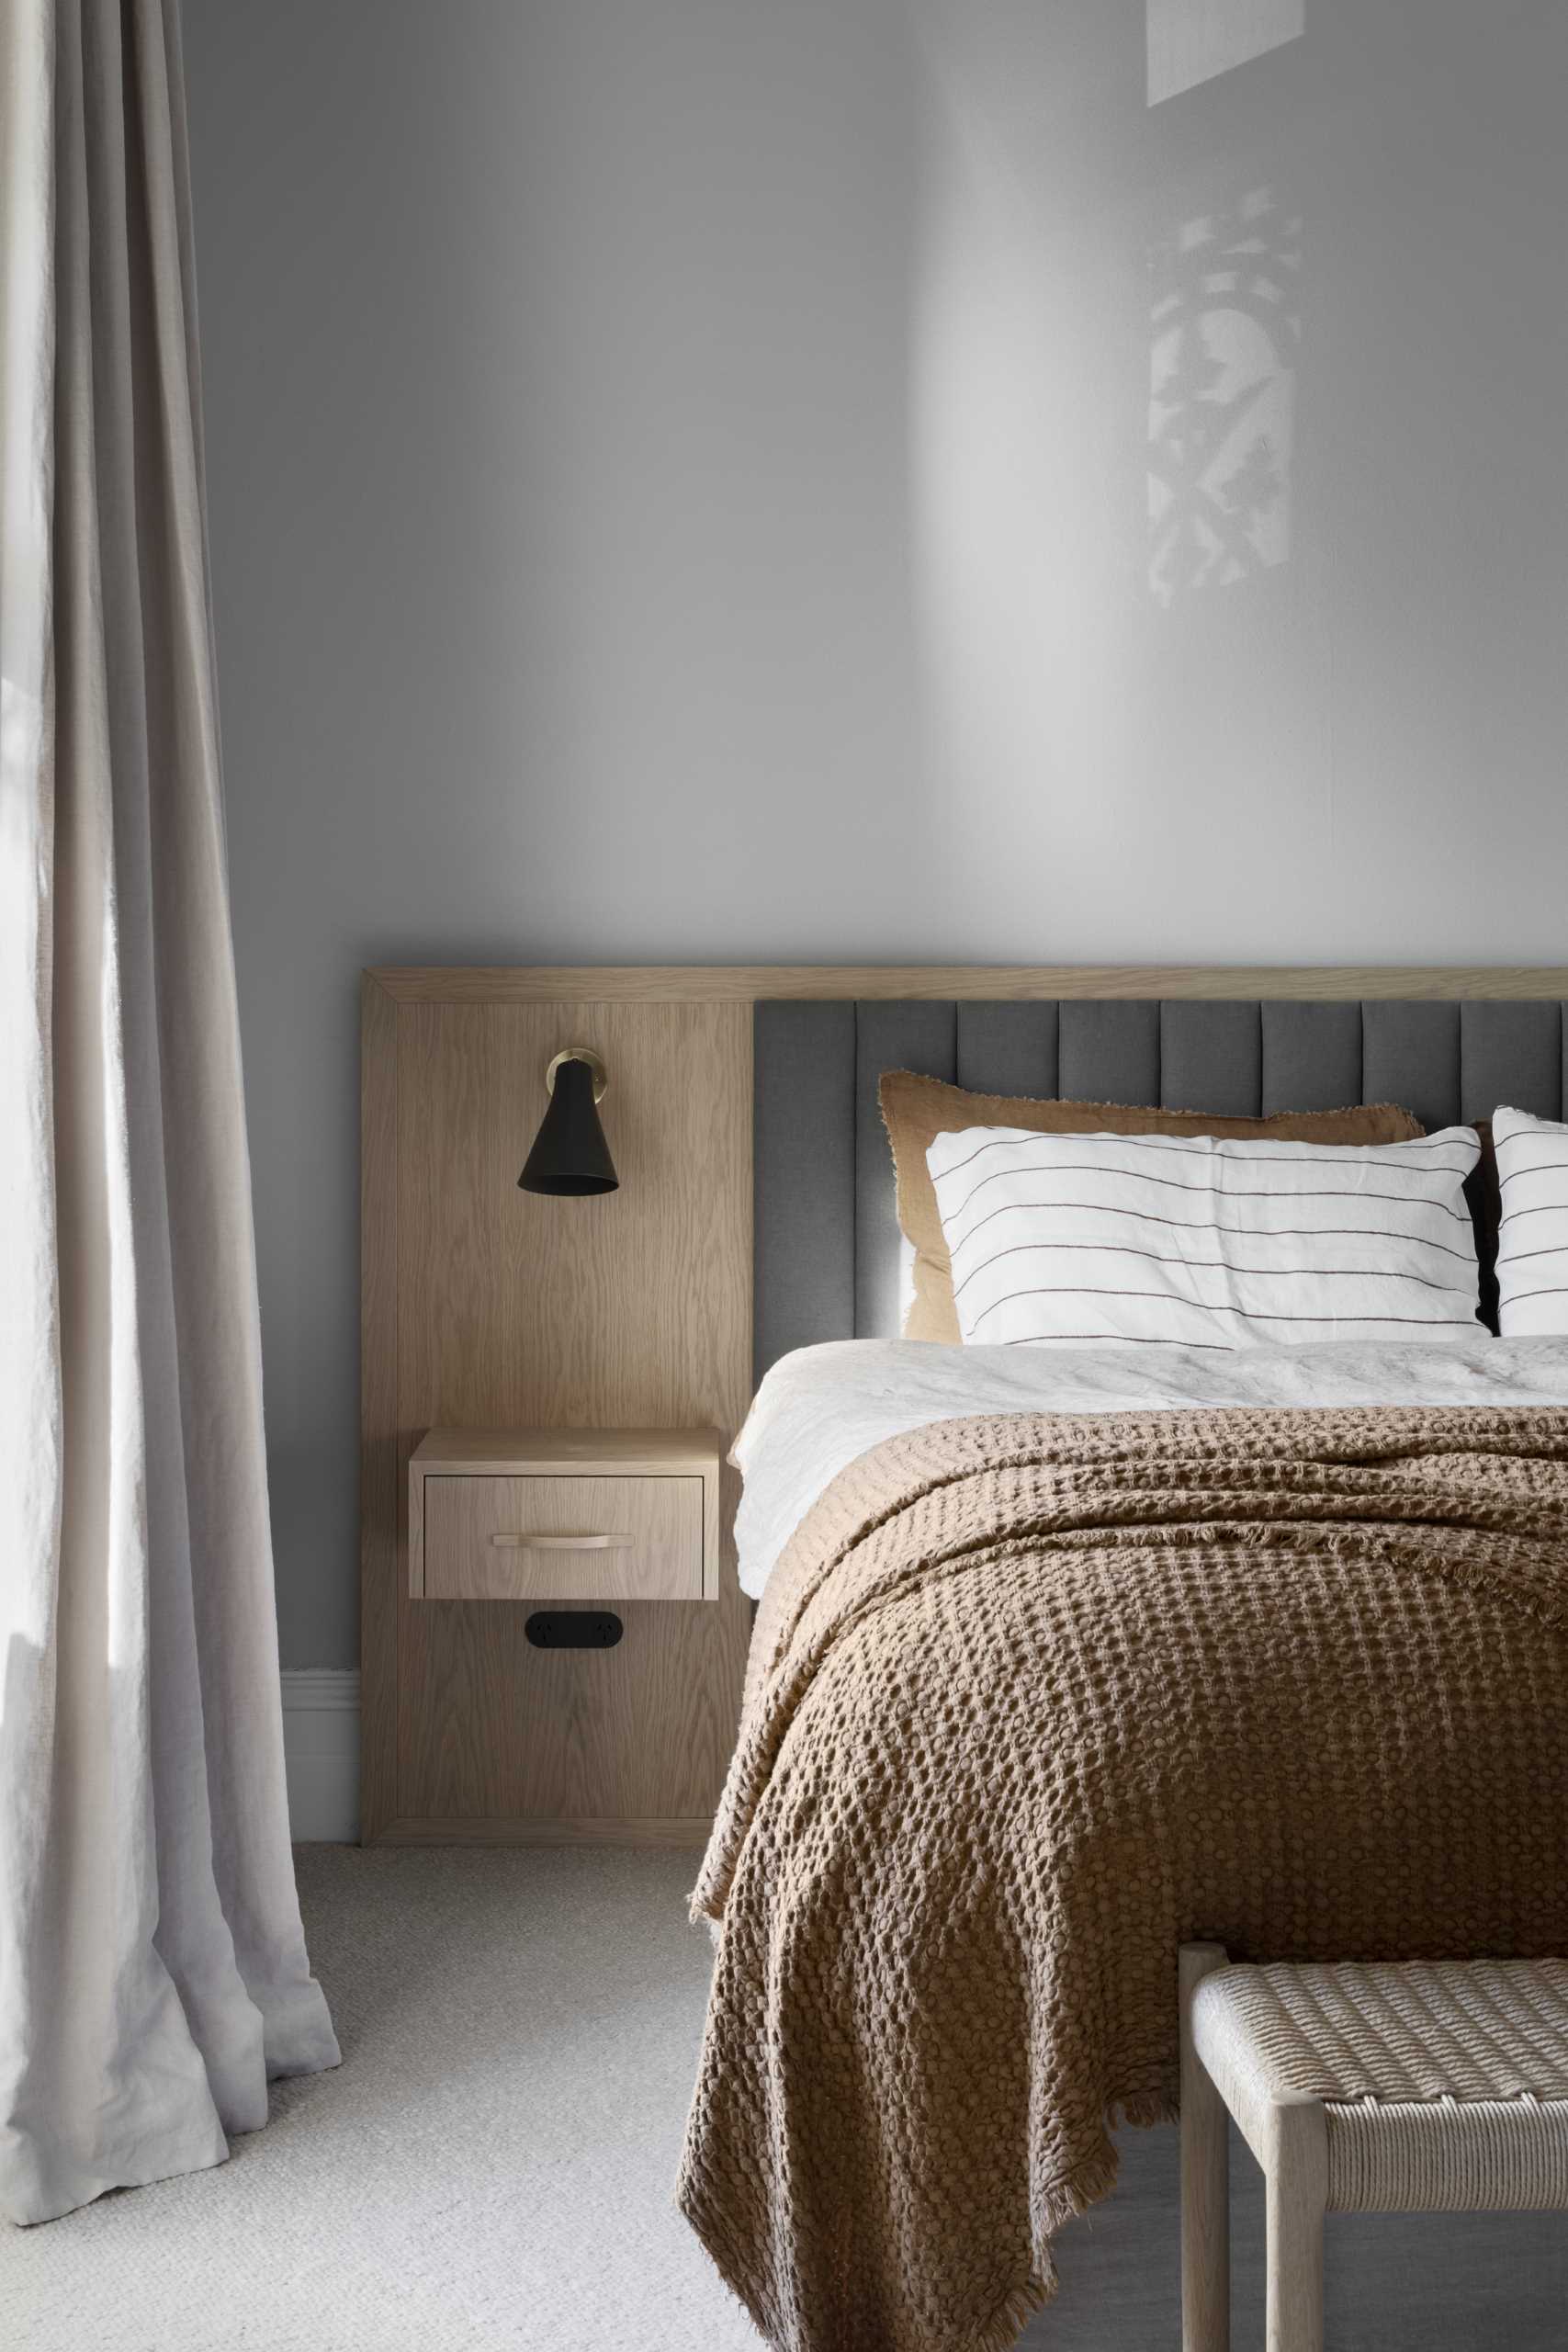 In an updated bedroom, a light wood and upholstered headboard includes a floating bedside table, as well as a wood closet and built-in desk.